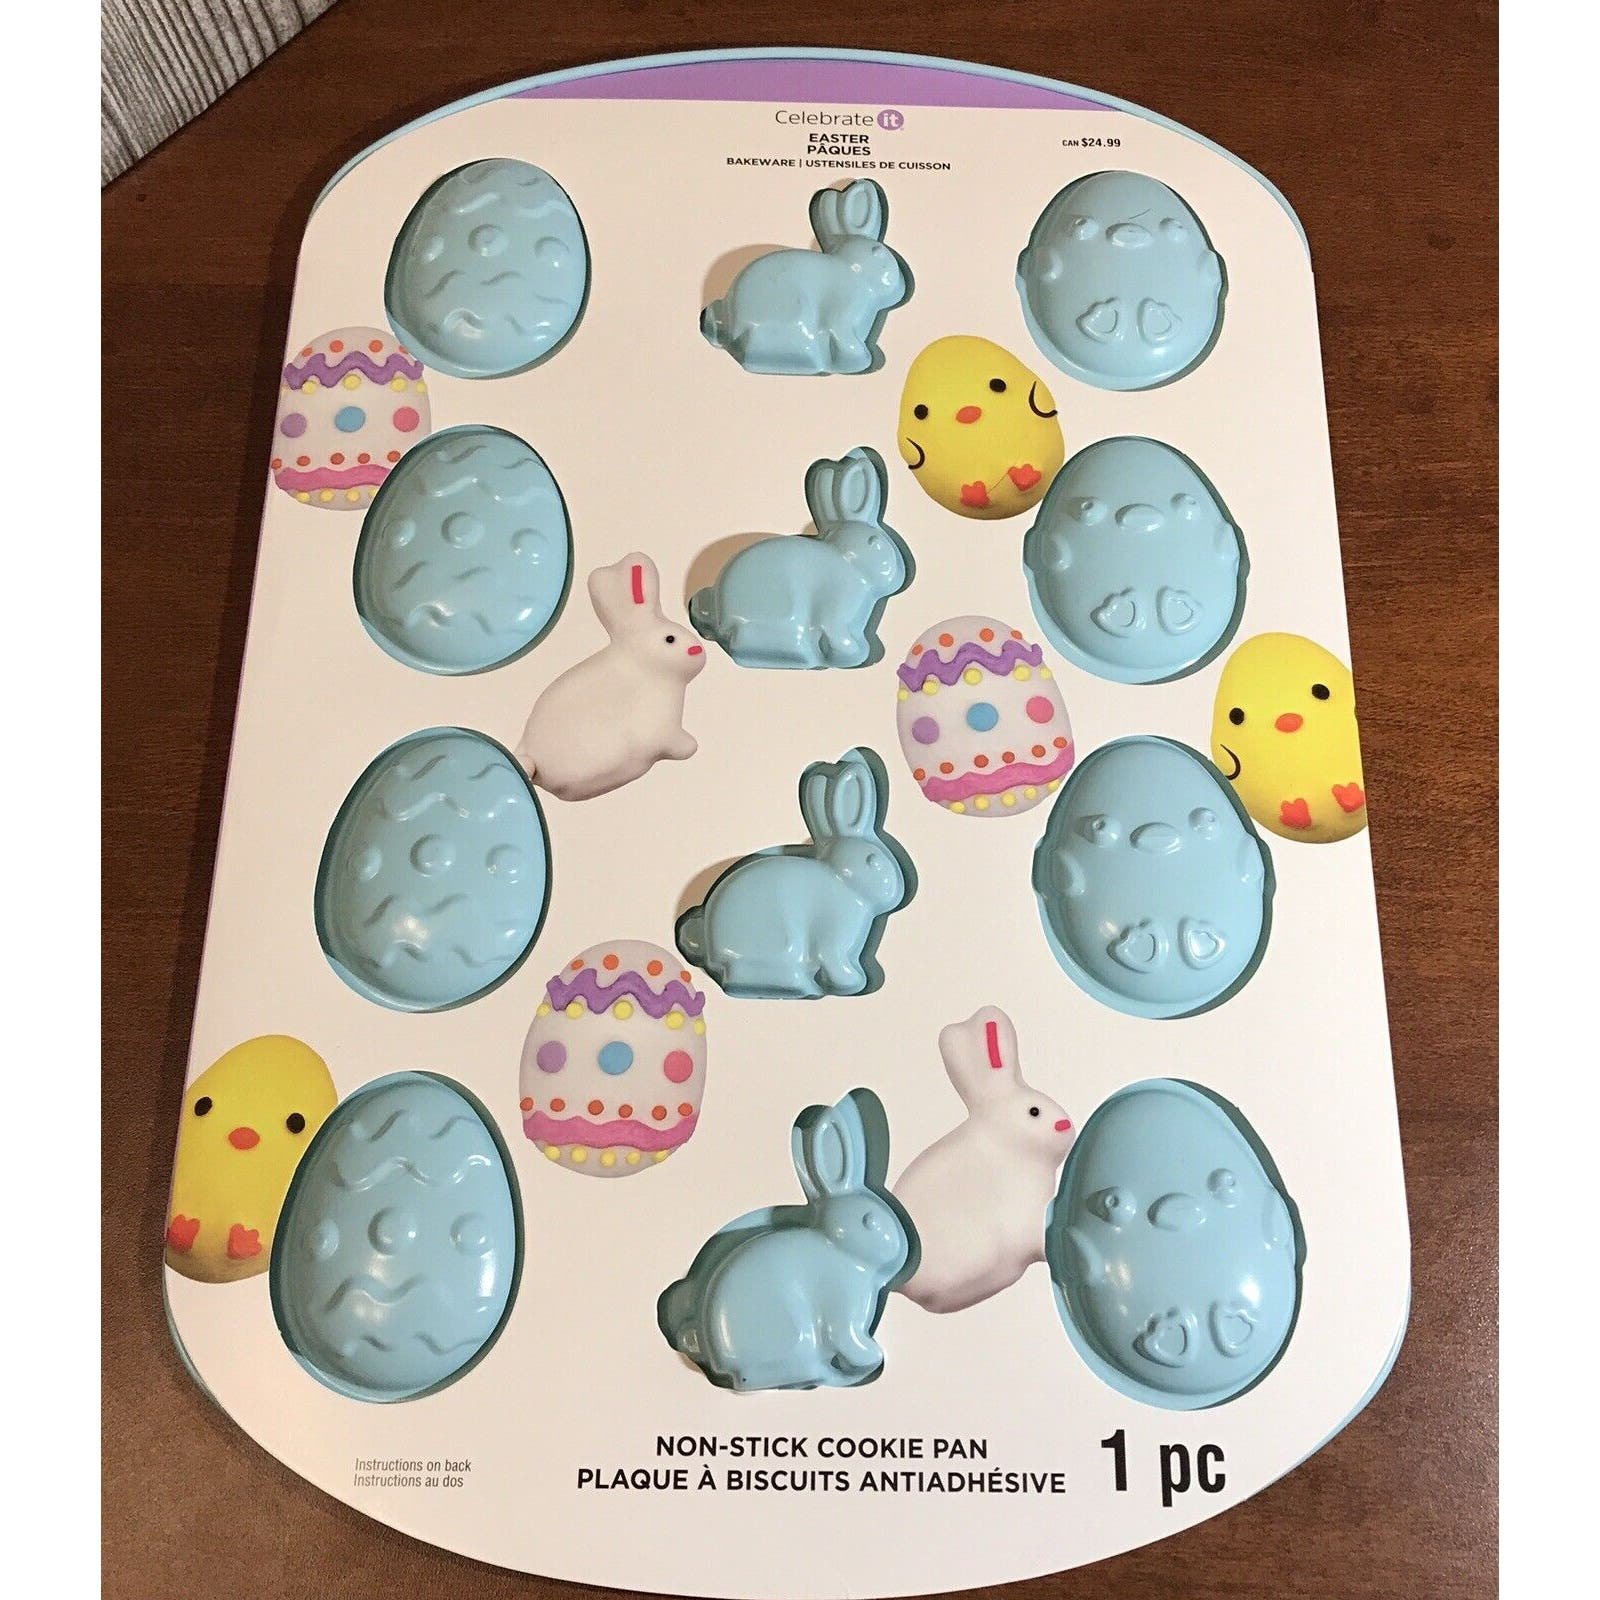 NEW! Celebrate It Easter Spring Non-Stick Cookie Baking